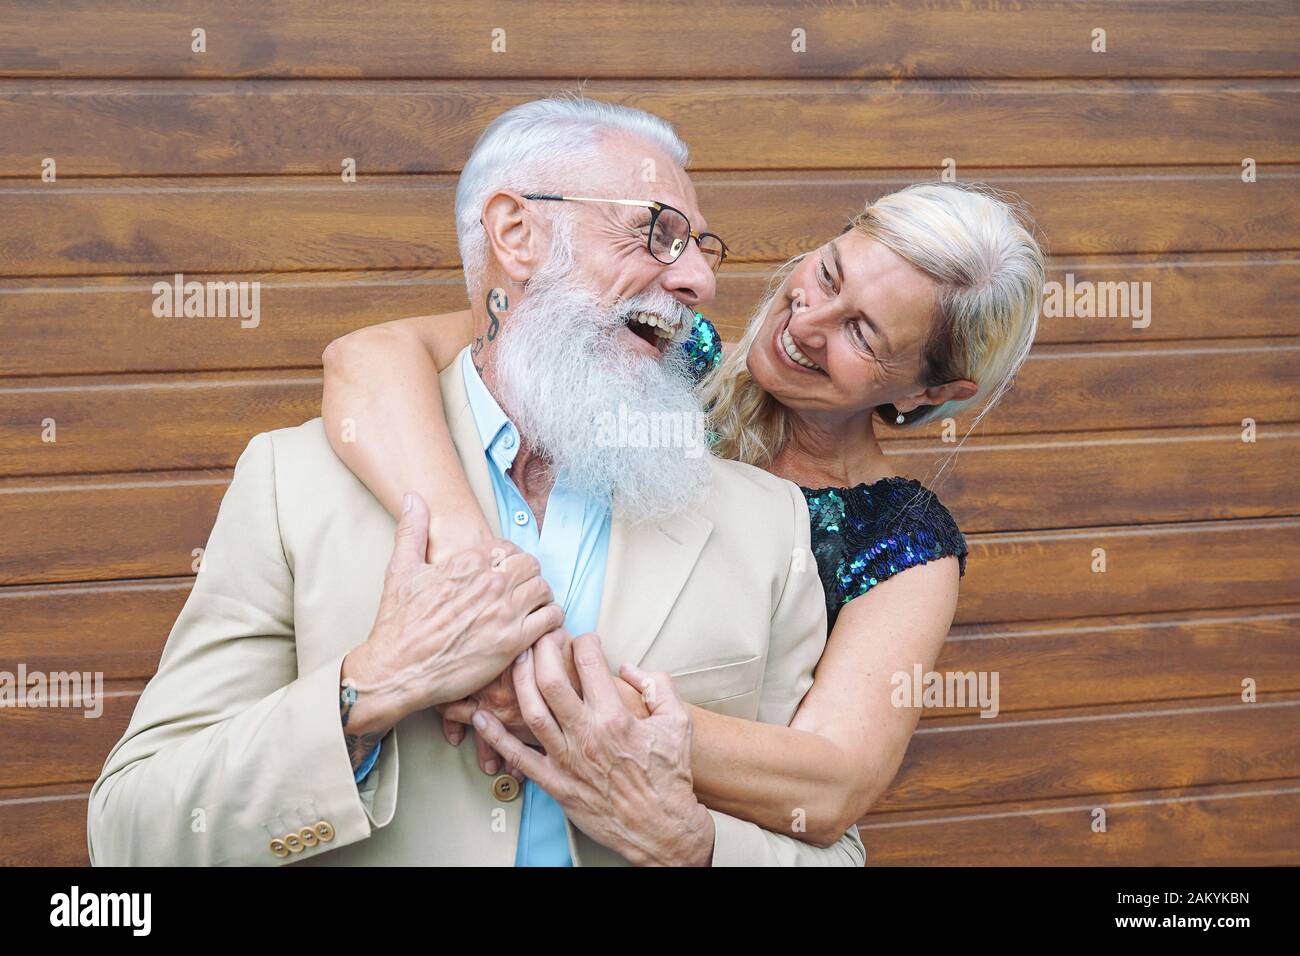 Happy fashion seniors couple embracing outdoor - Mature elegant people laughing and having a tender moment together Stock Photo